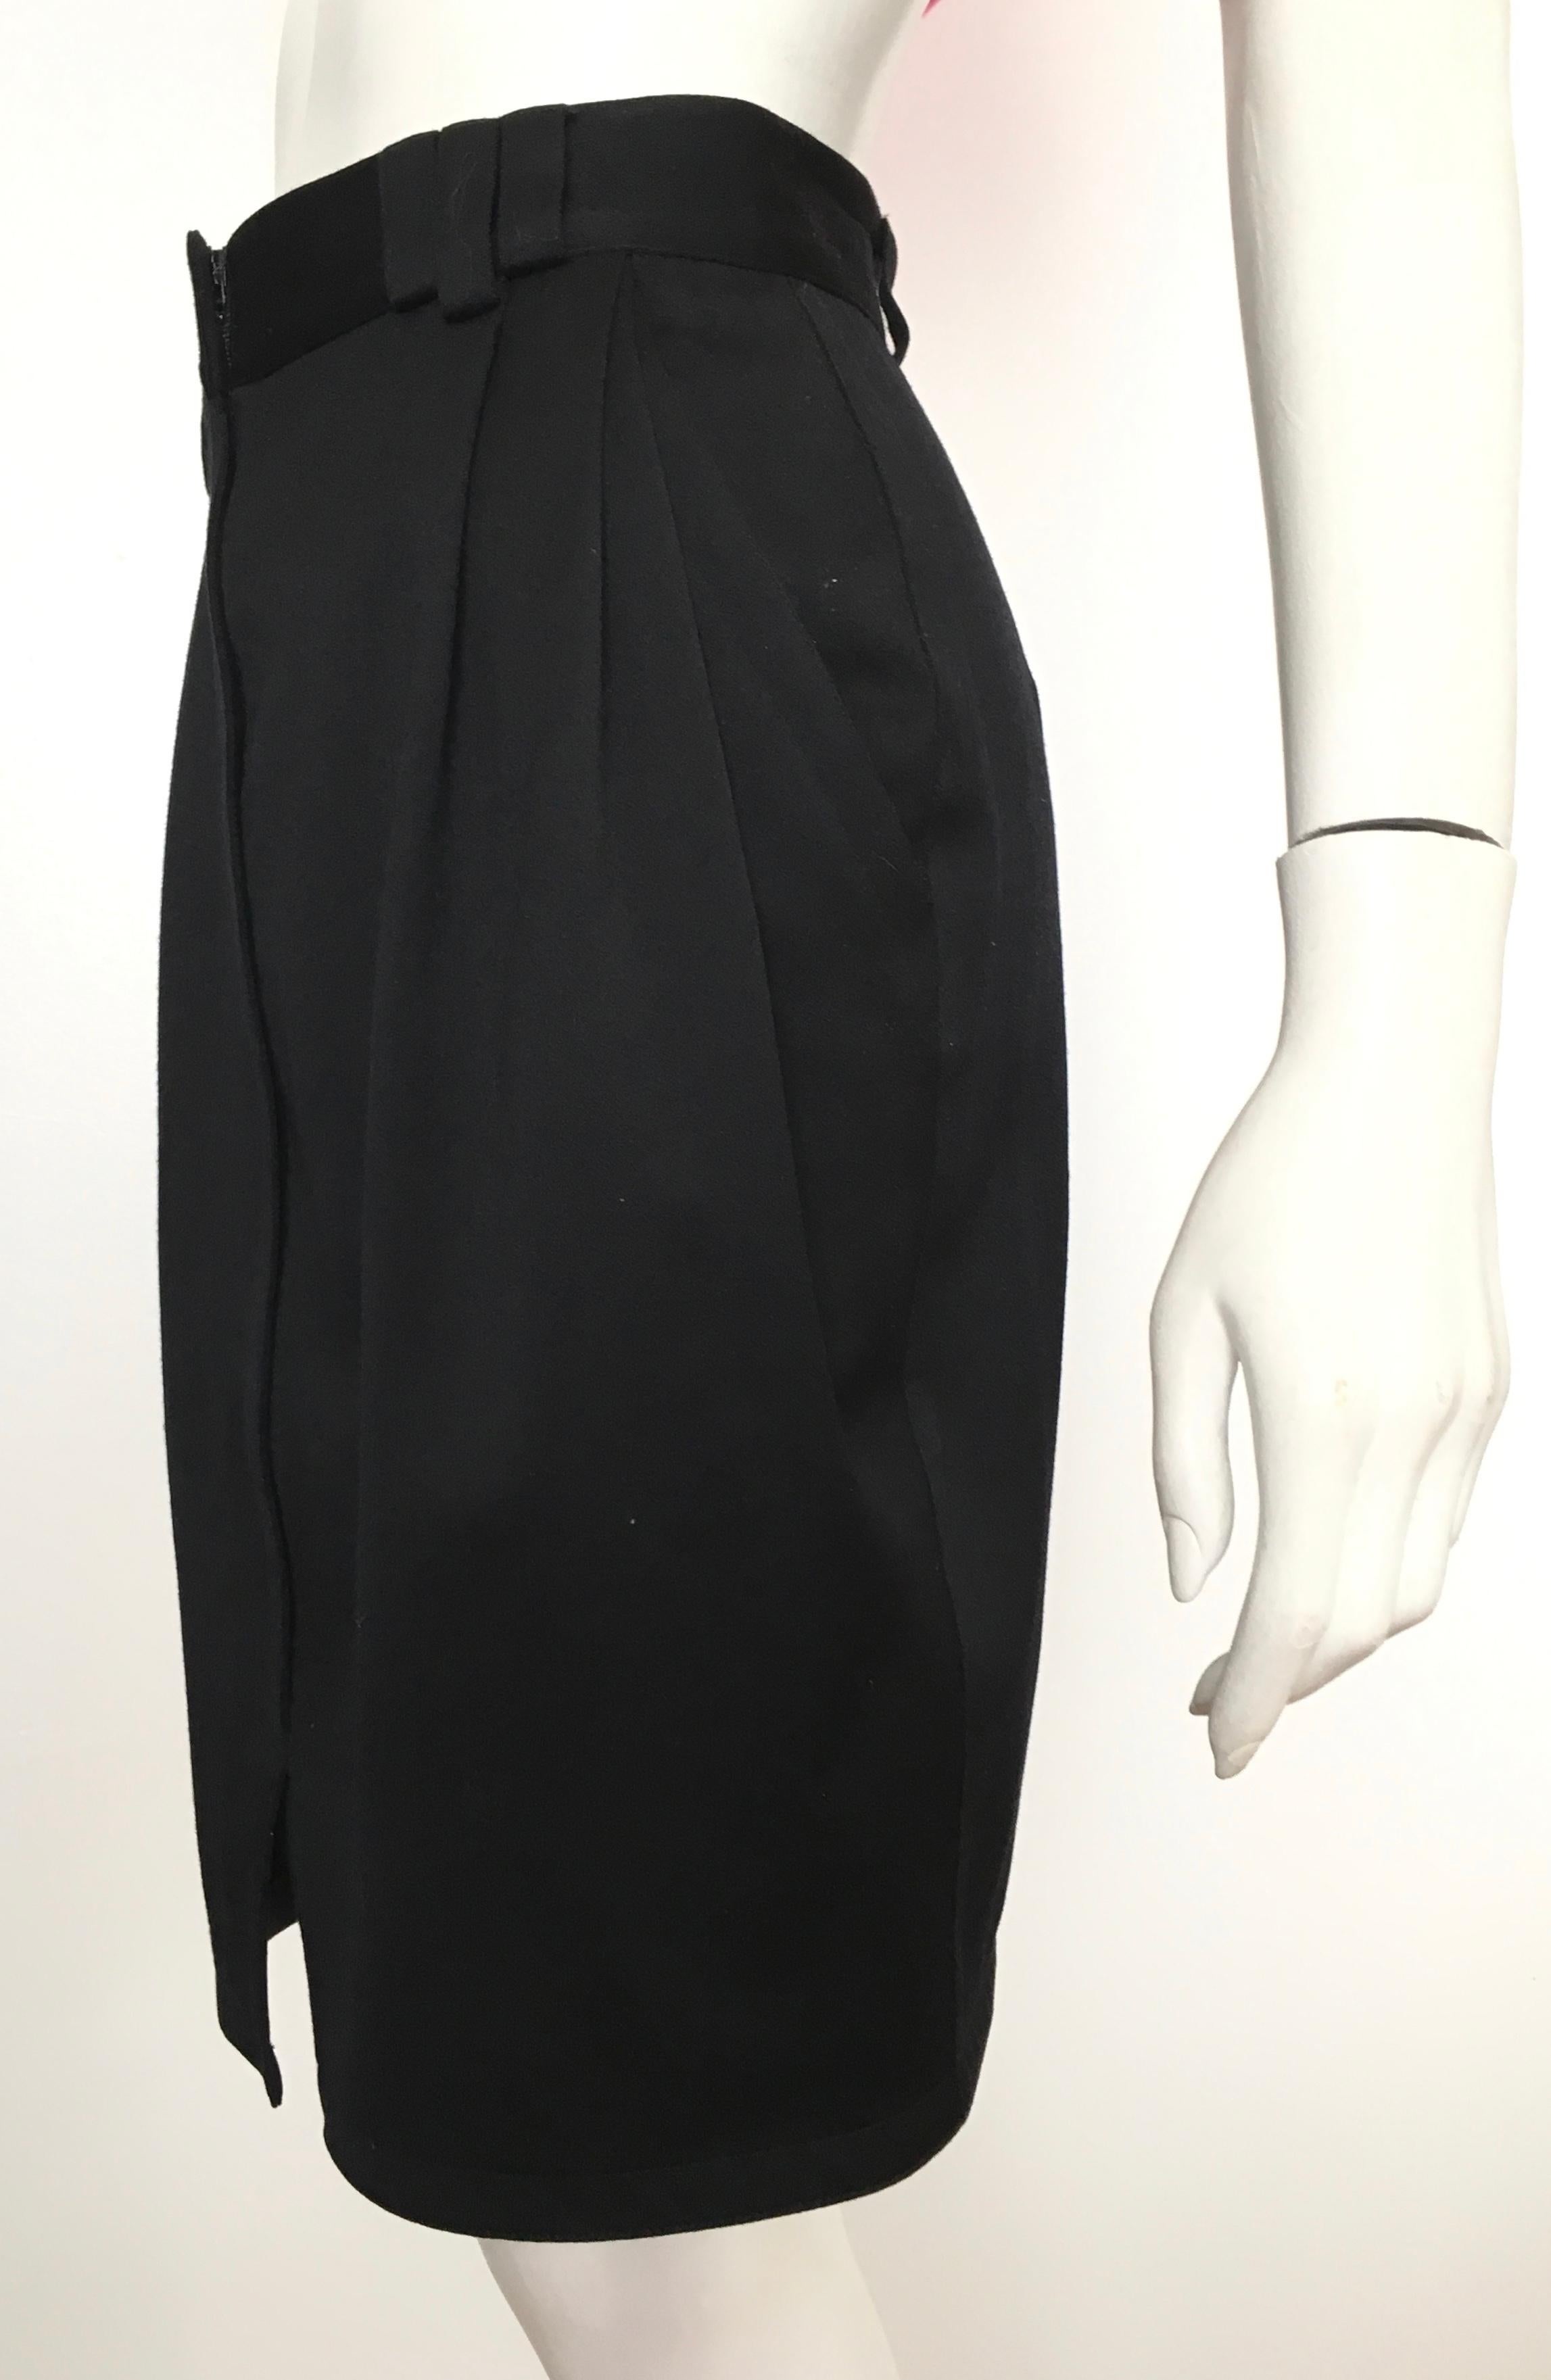 Gianni Versace 1980s Black Wool Skirt with Pockets Size 4.  For Sale 2